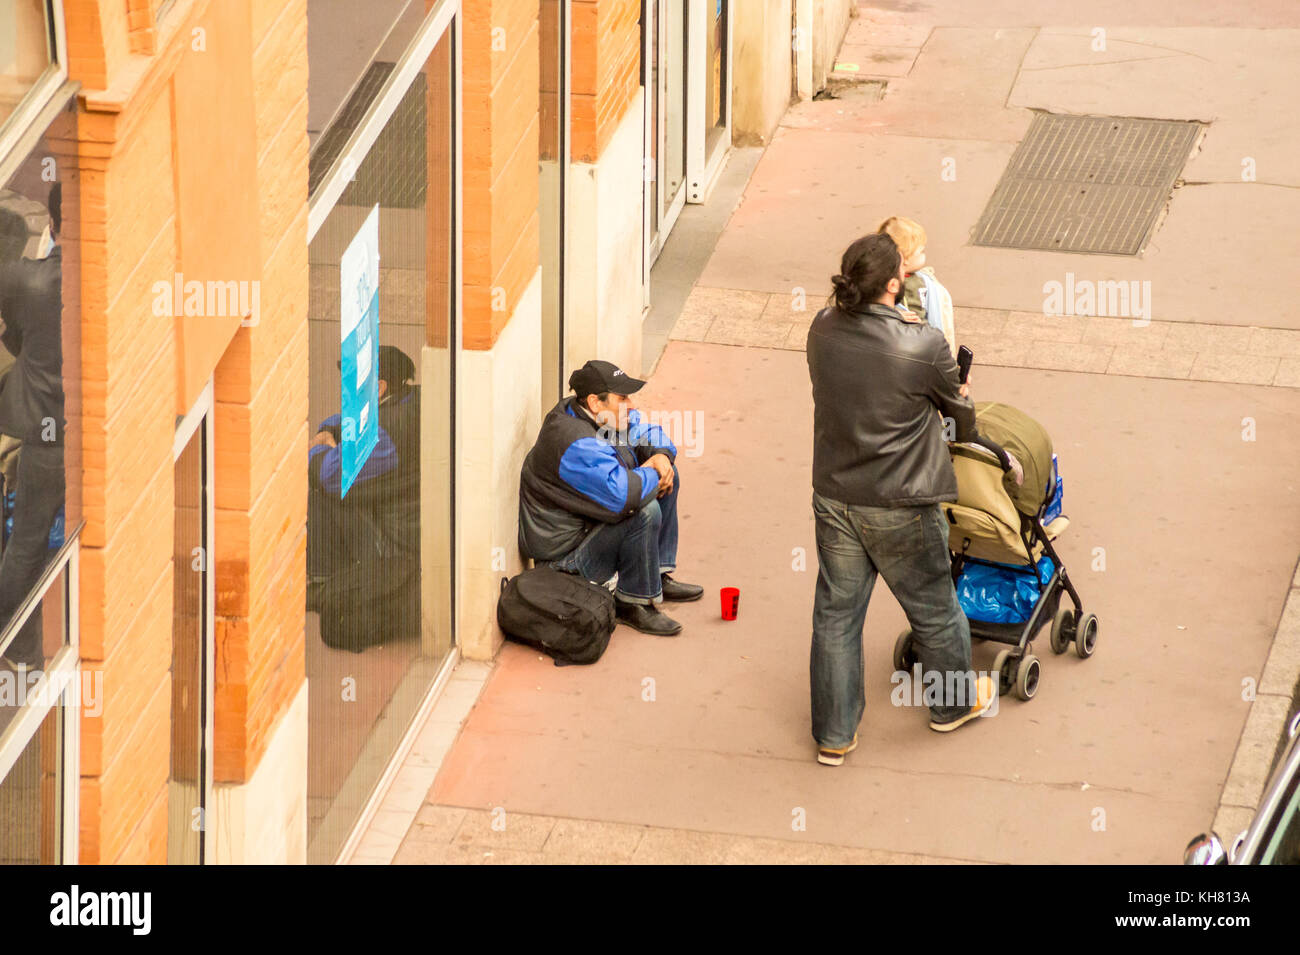 A beggar outside Monop' convenience store, Place Victor Hugo, Toulouse, Occitanie, France Stock Photo